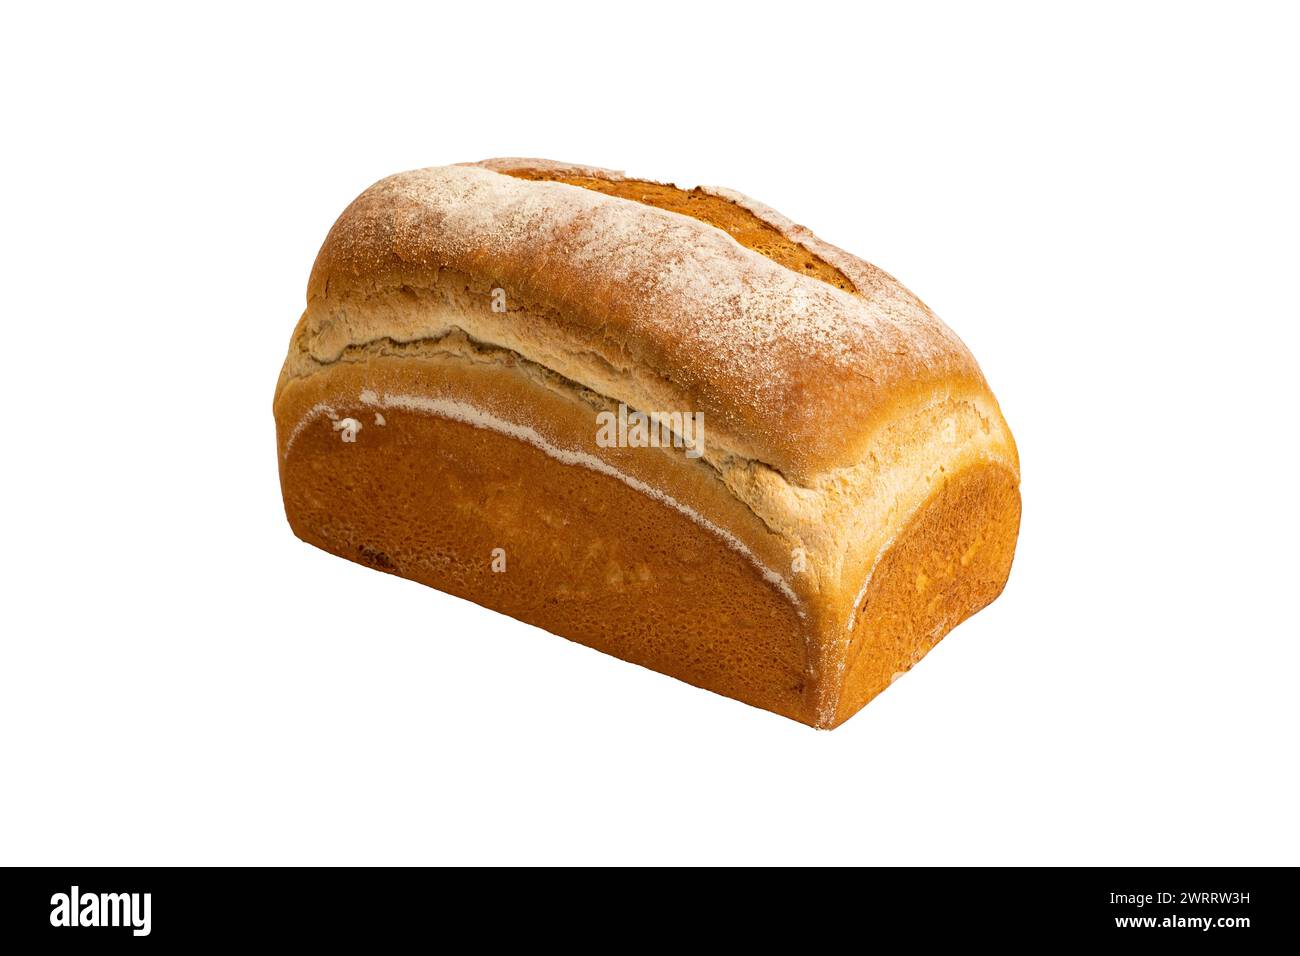 The bakery product of a white farmhouse loaf of bread on a white background Stock Photo